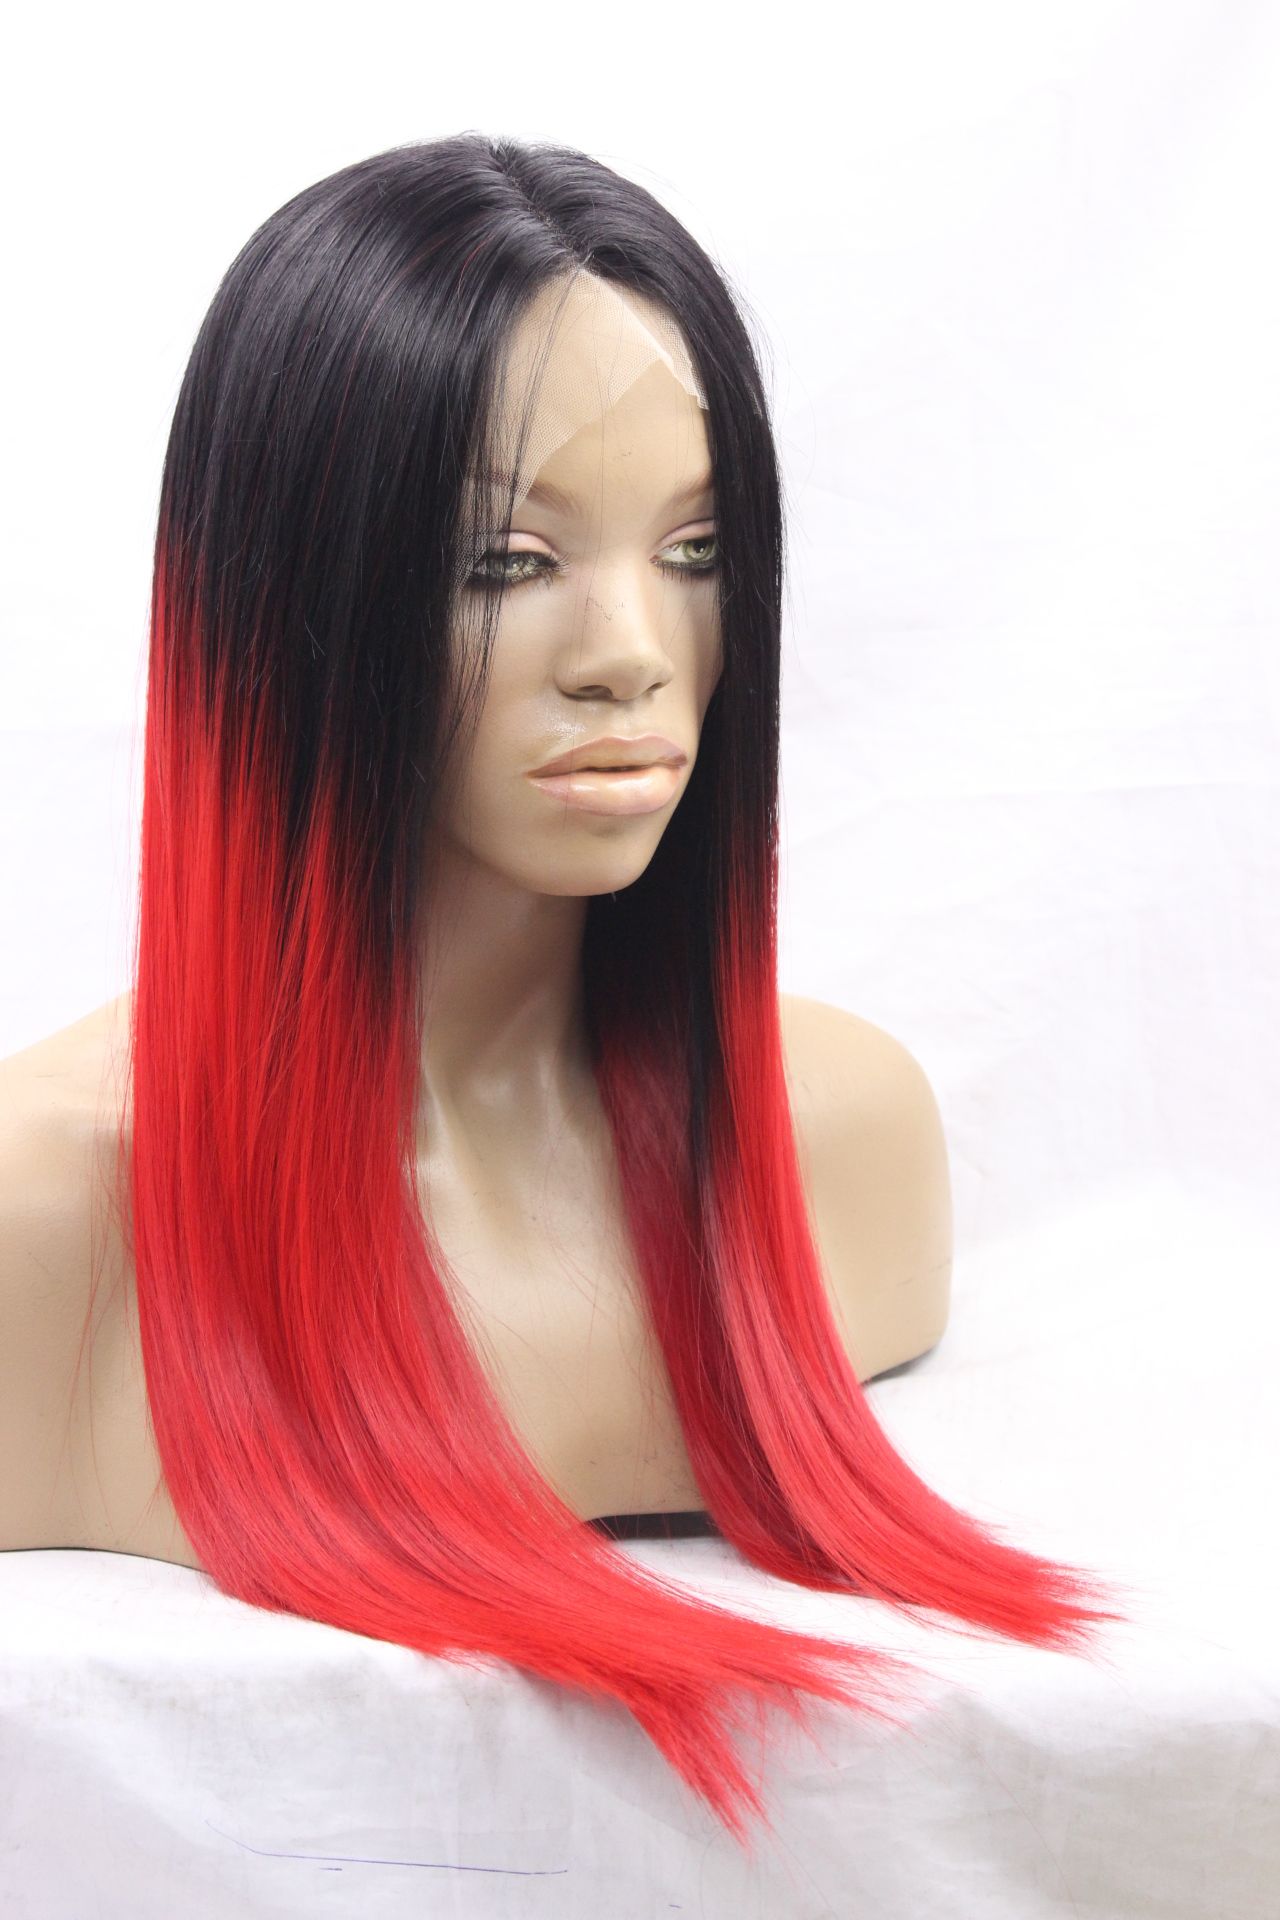 Black Red Ombre Hair Long Straight Heat Resistant Fiber Synthetic Wig Front Lace Wig Or Capless Inexpensive Wigs Hair Wigs Uk From Oxettehair 24 83